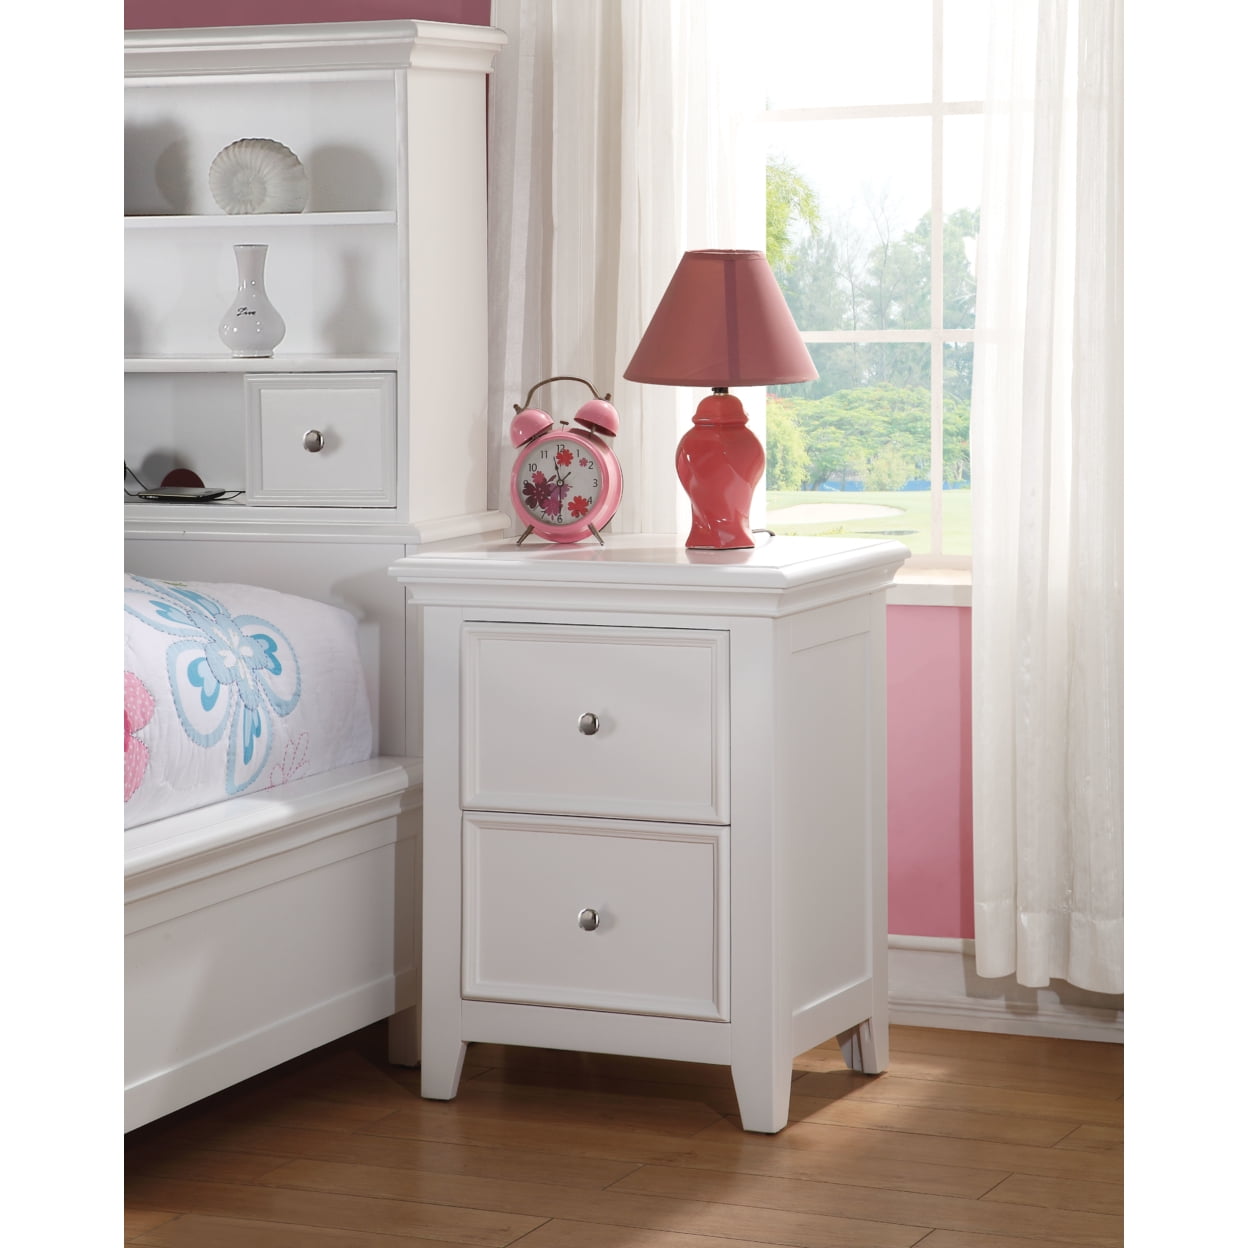 Picture of ACME 30599 Lacey Nightstand, White - 27 x 22 x 16 in.